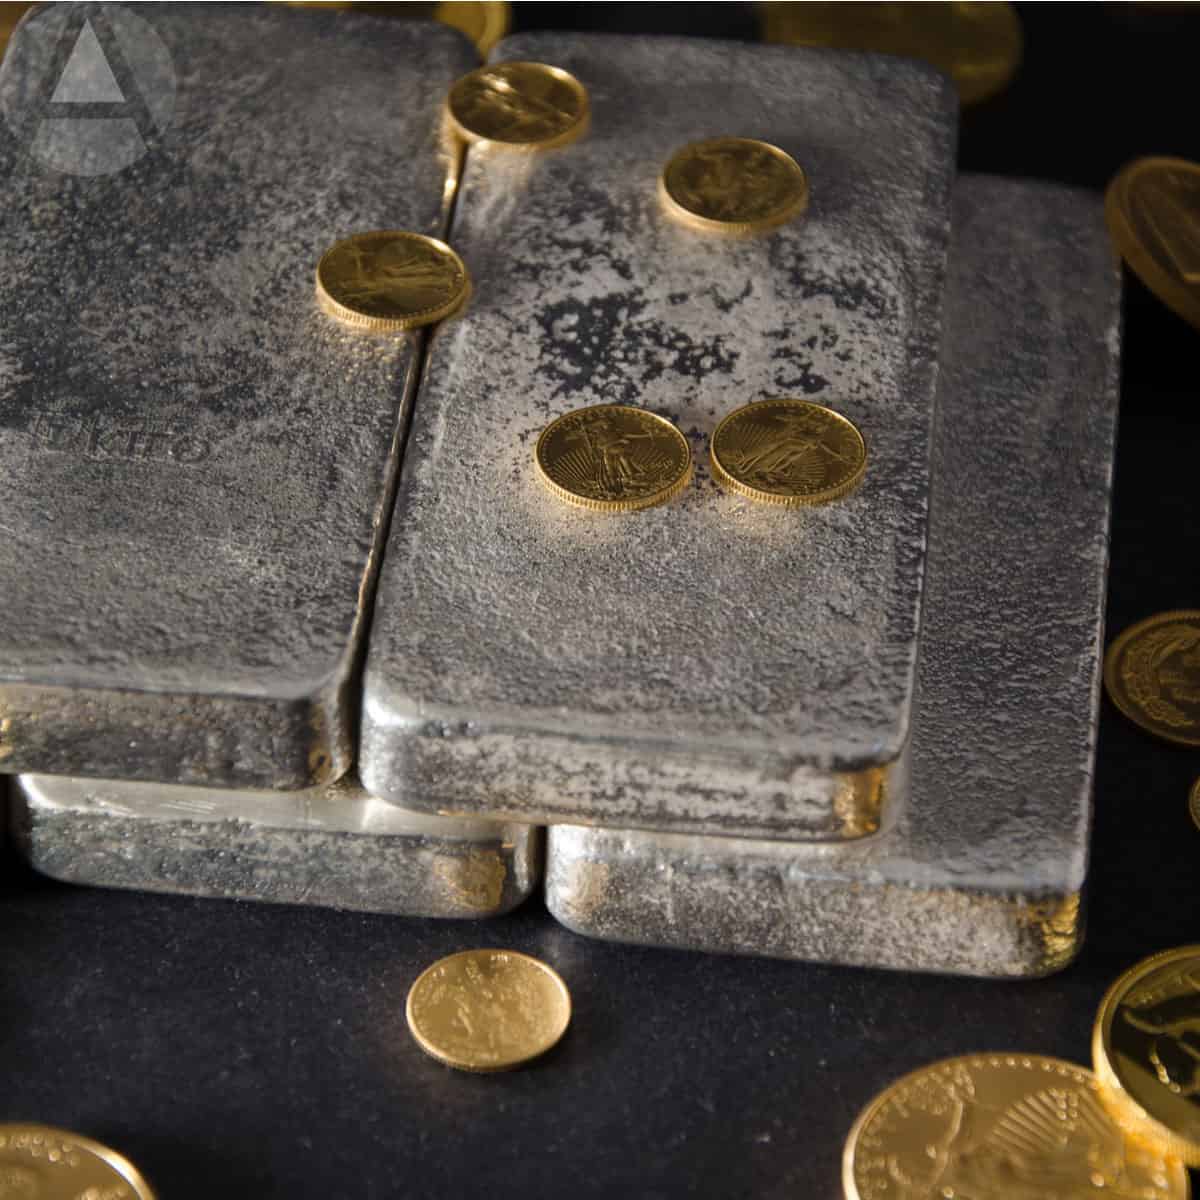 Silver bars and gold coins on a black surface representing assets for a precious metals IRA.